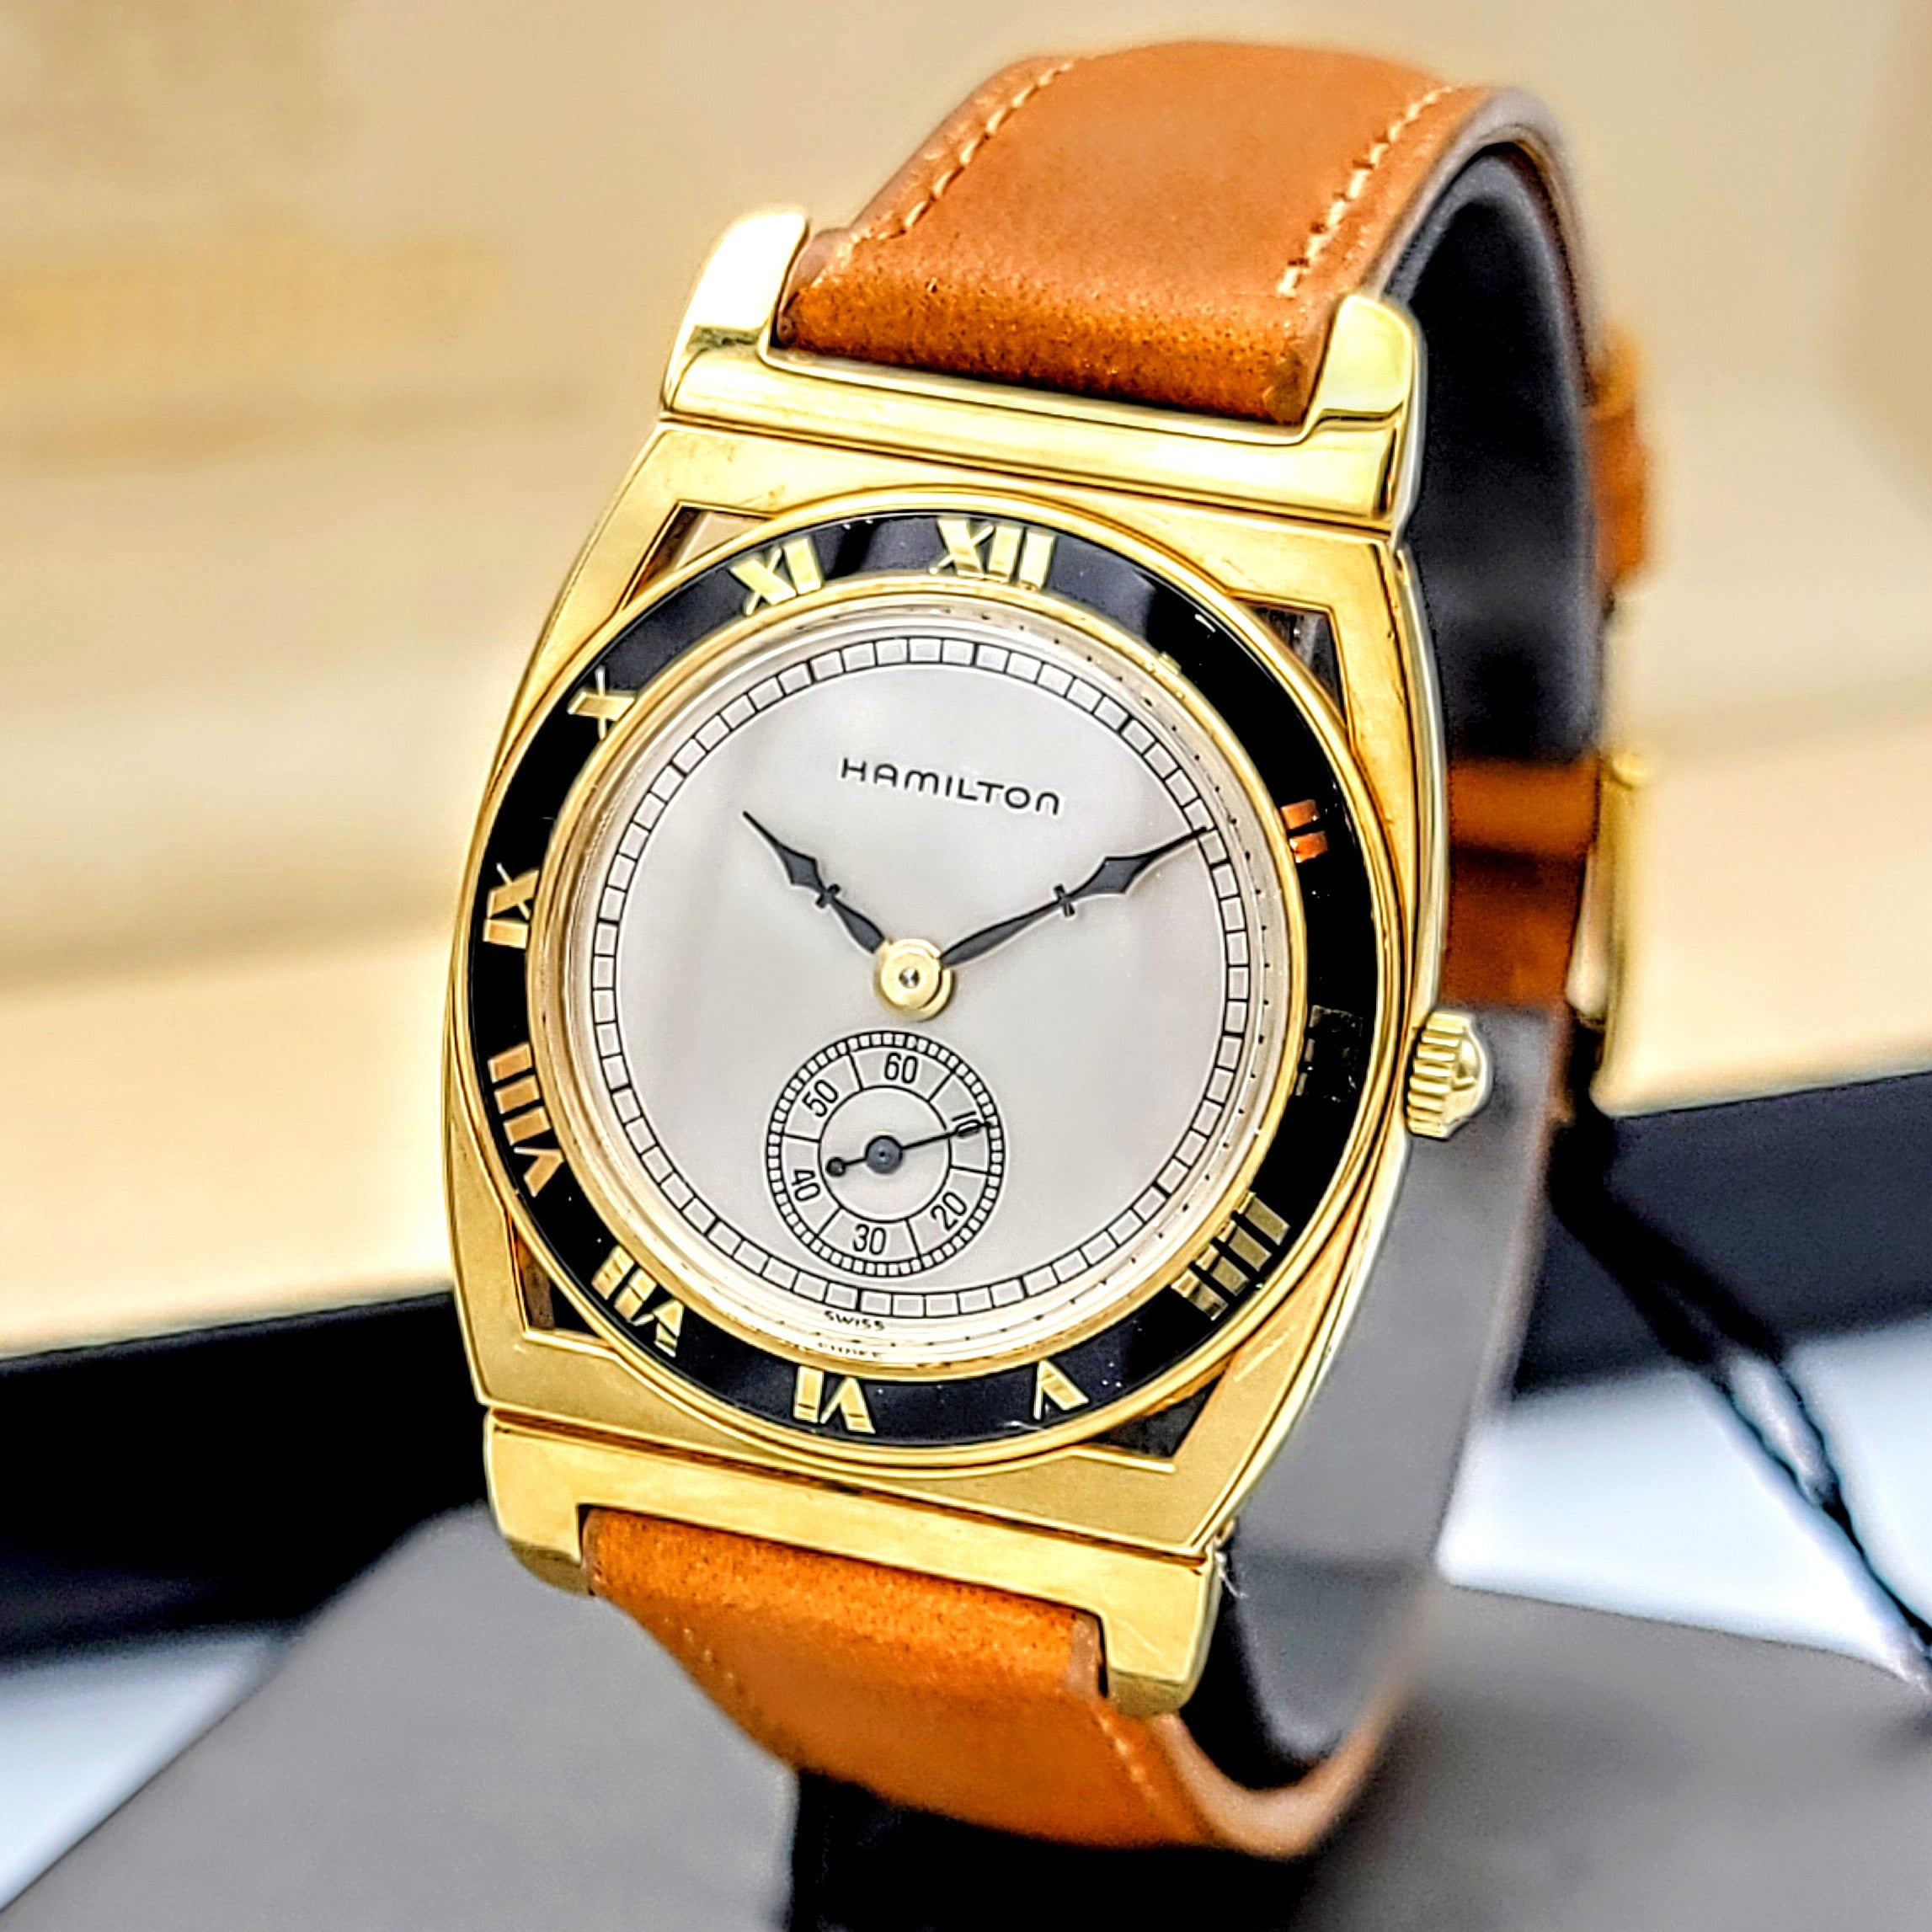 Hamilton "Piping Rock" Watch Registered Limited Edition